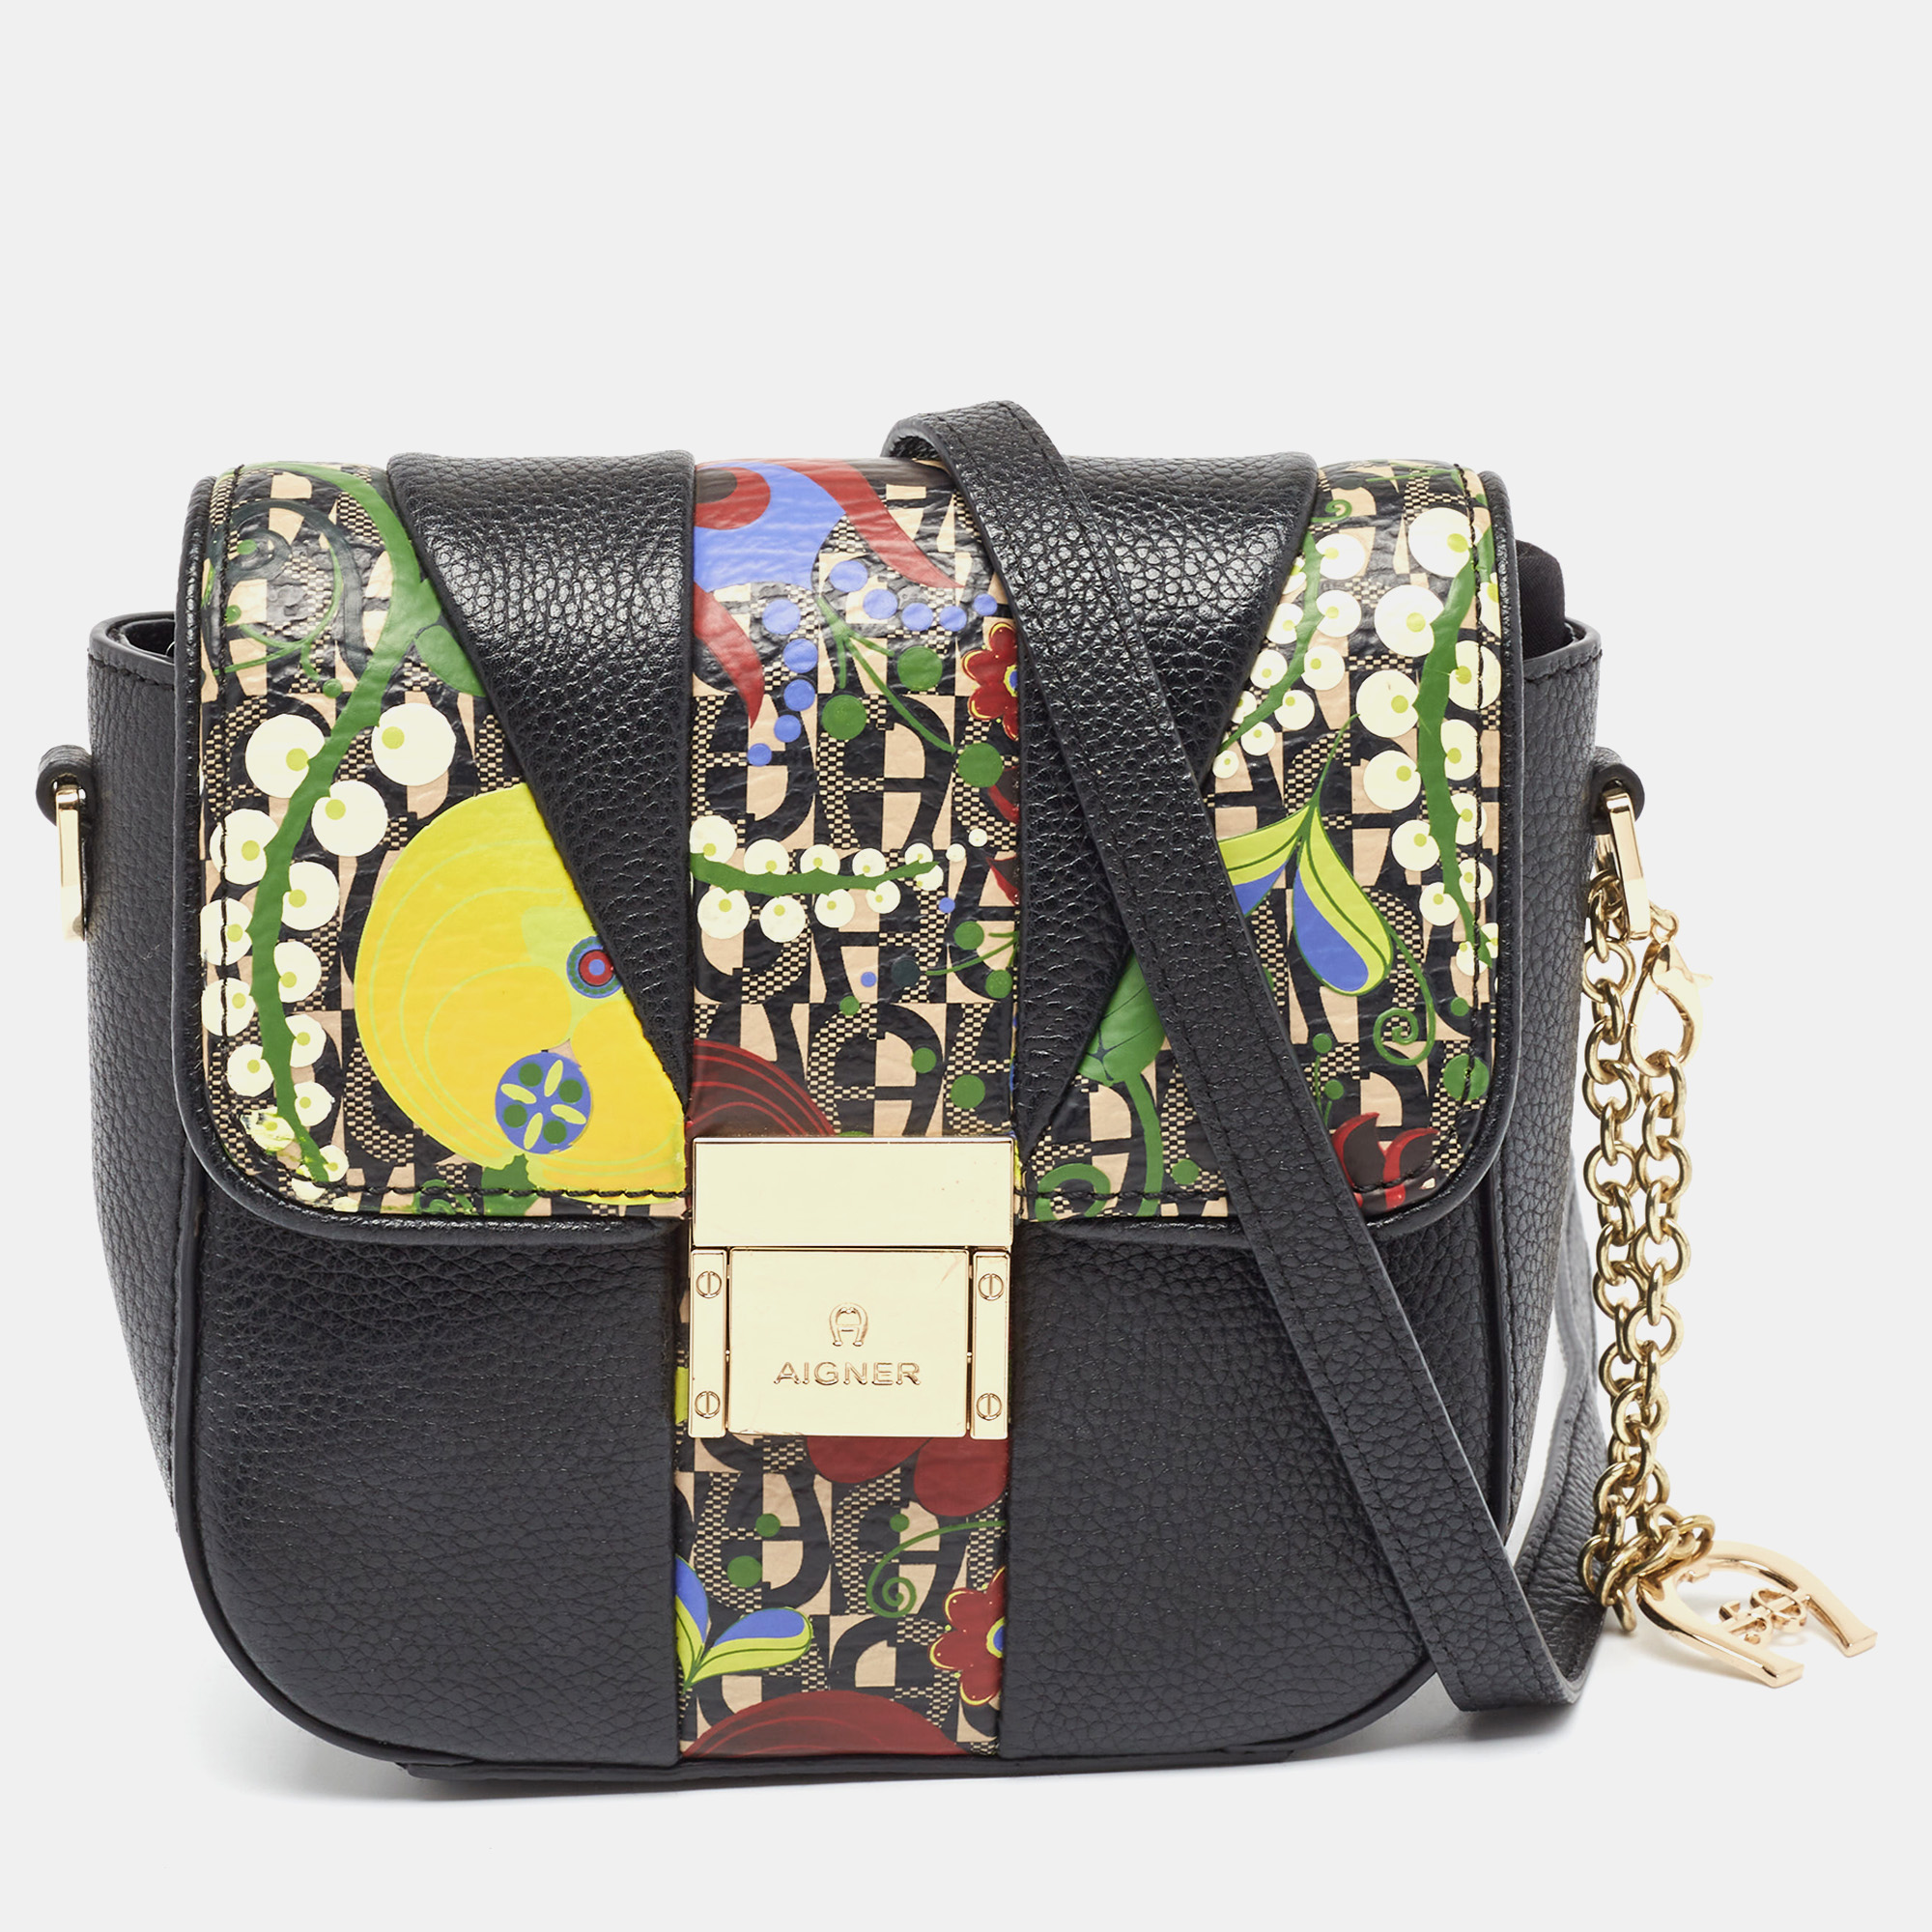 

Aigner Black Leather and Coated Canvas Crossbody Bag, Multicolor